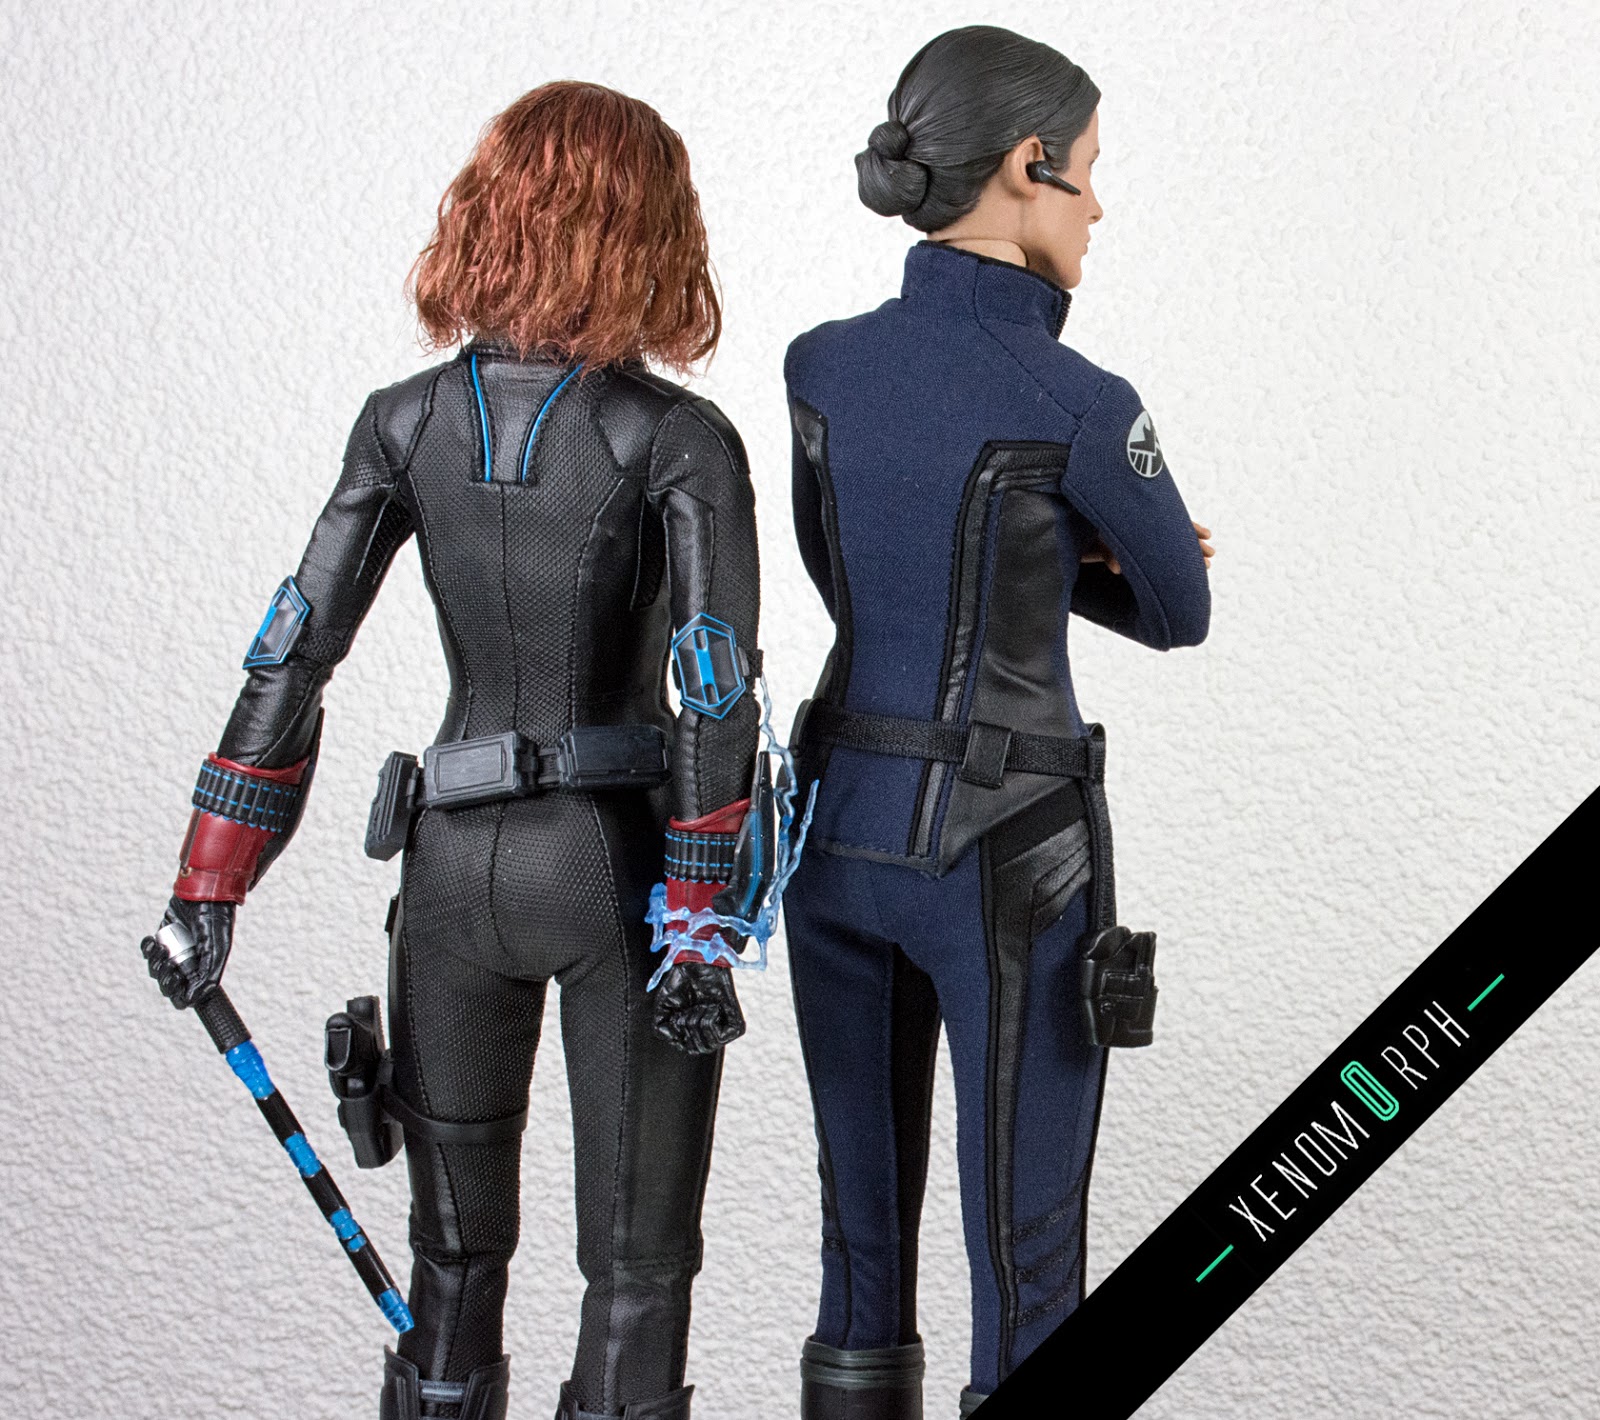 Hot Toys Maria Hill - Avengers: AoU - 1/6 MMS305 exclusive - video review a...